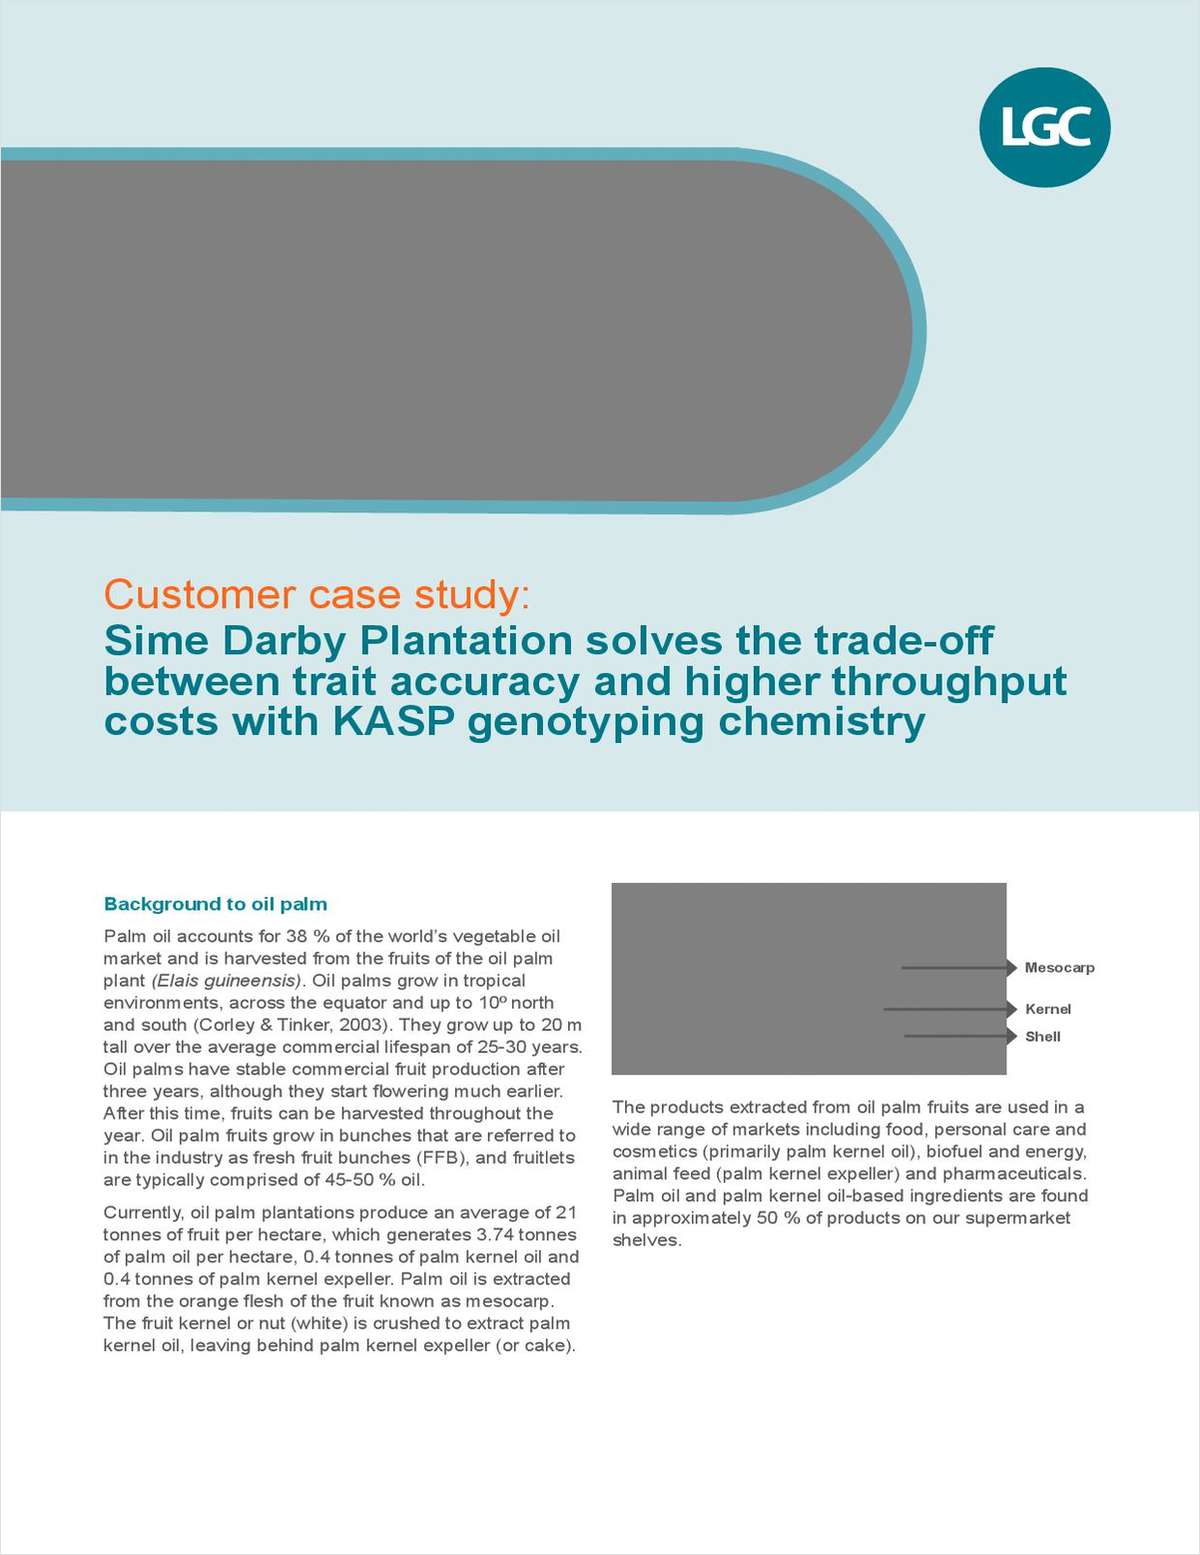 Sime Darby Plantation Solves the Trade-Off Between Trait Accuracy and Higher Throughput Costs With KASP Genotyping Chemistry